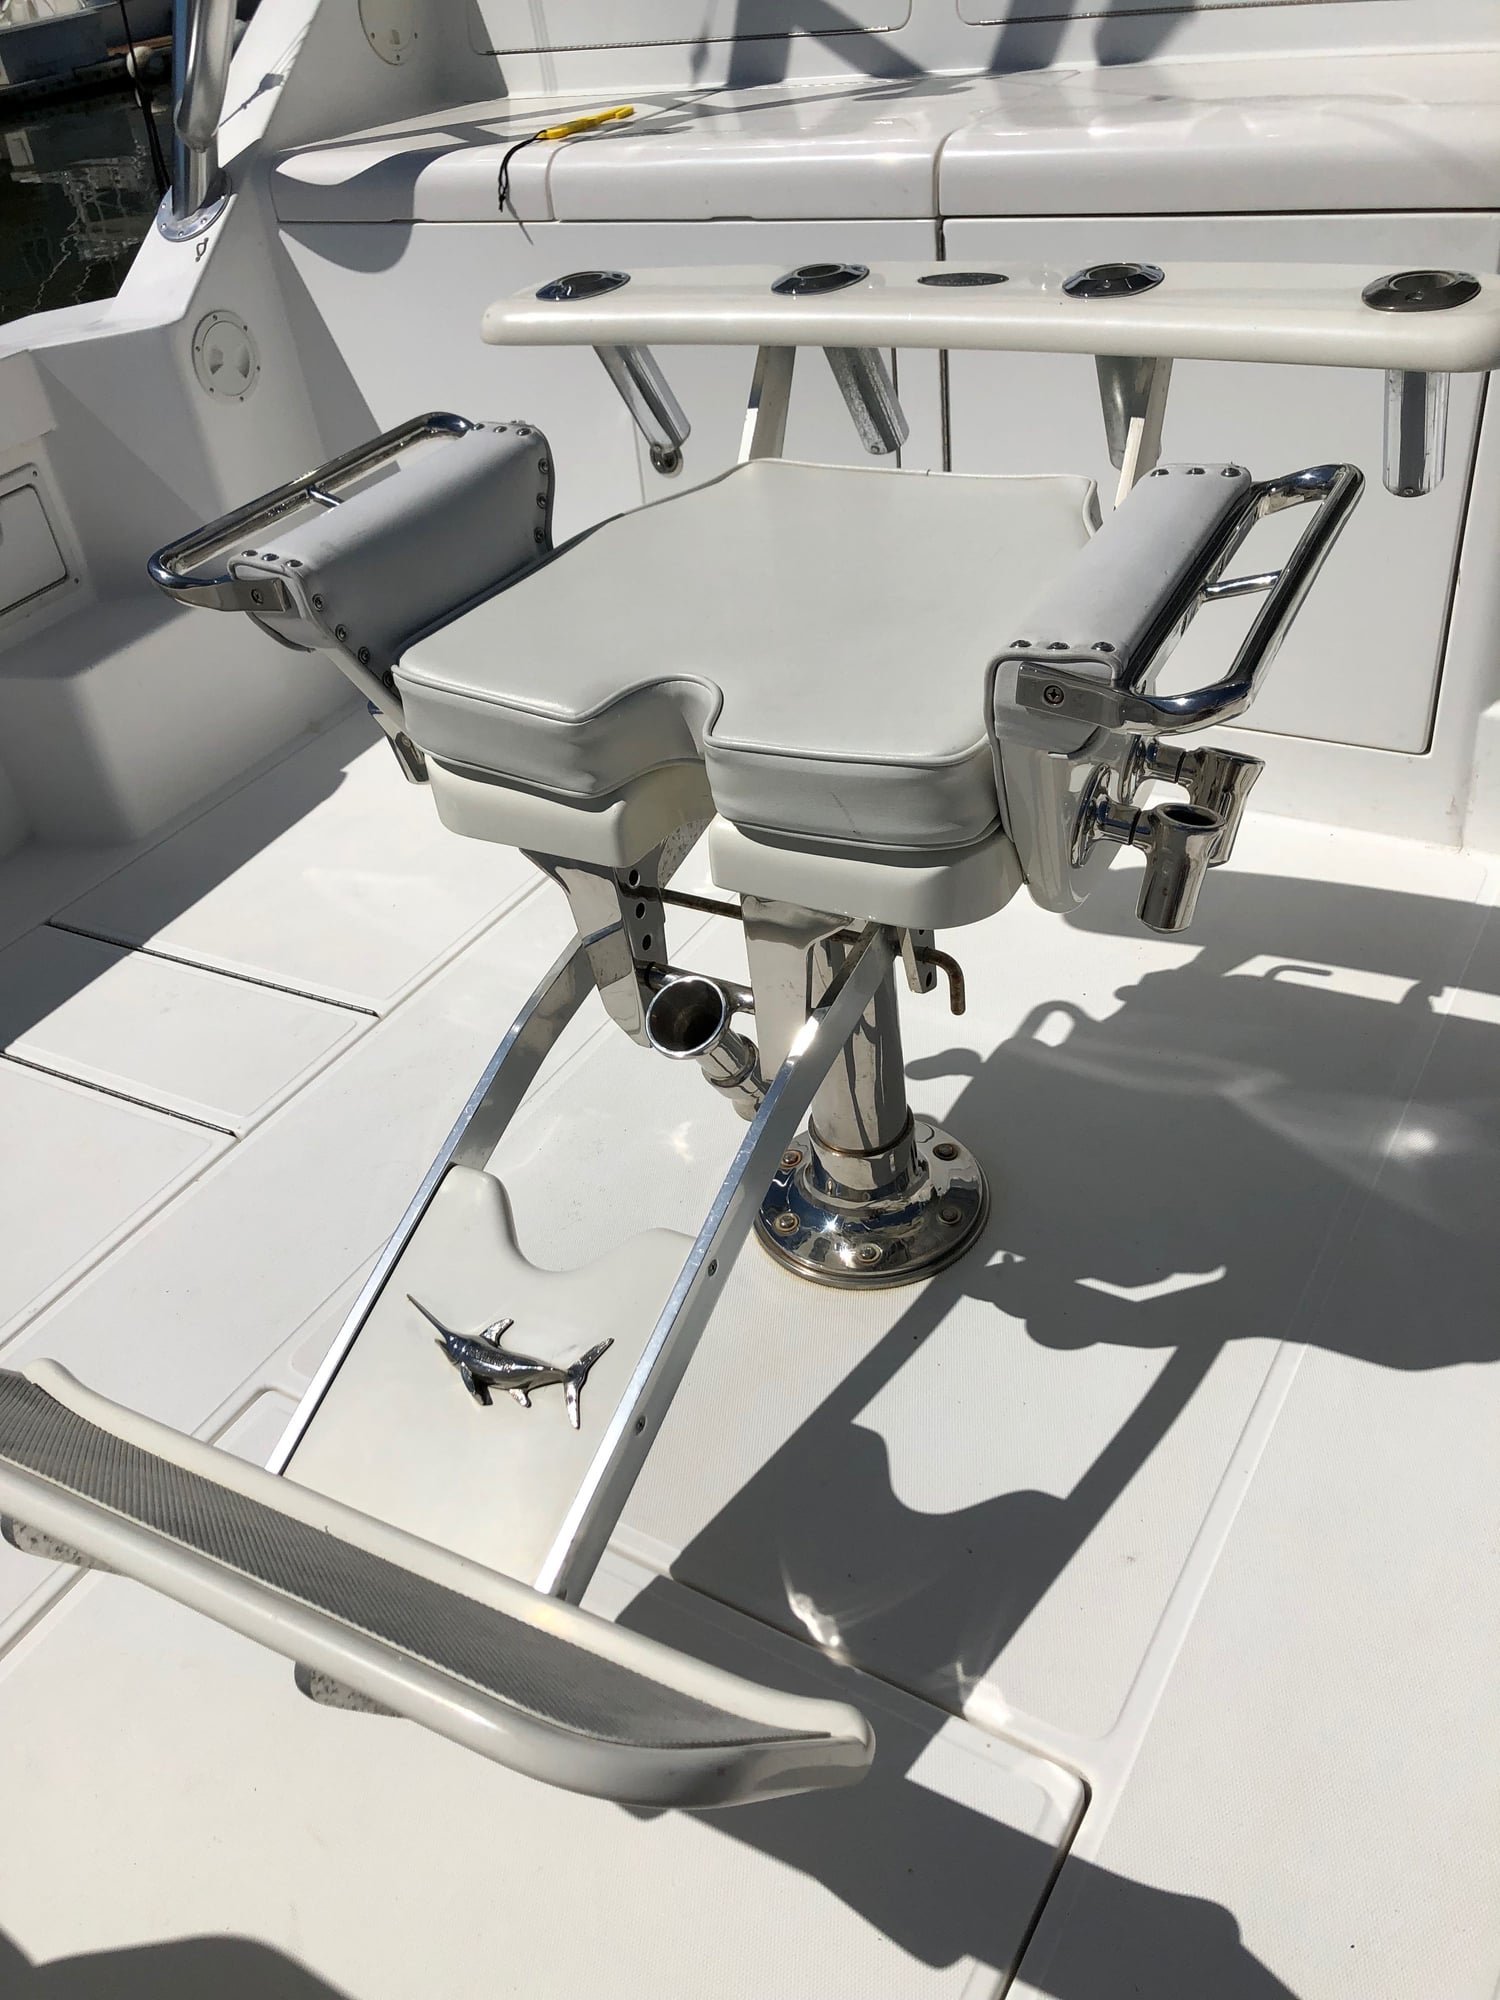 Scopinich Fighting Chair - The Hull Truth - Boating and Fishing Forum